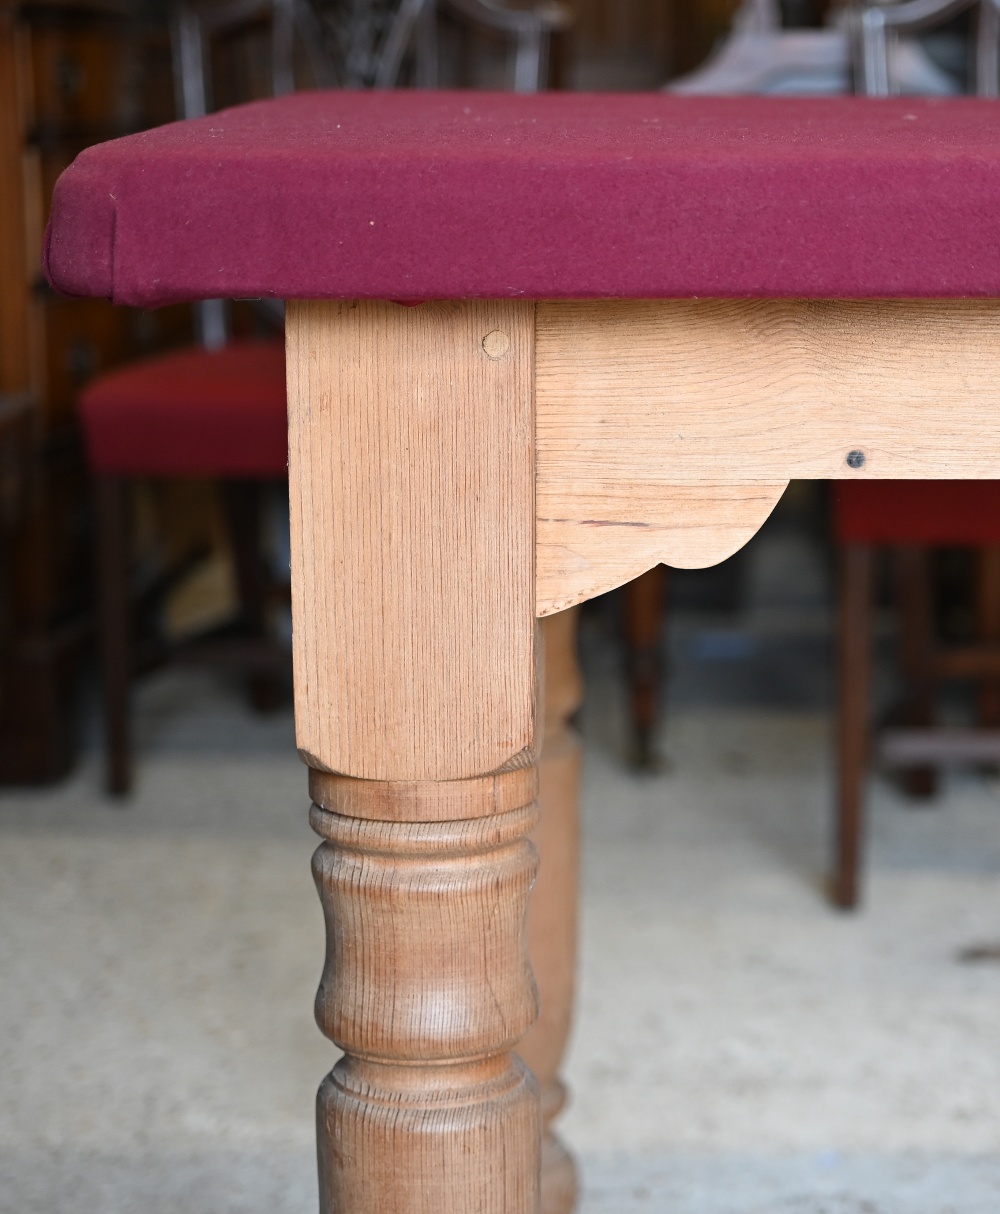 A pine workshop/crafting table with magenta baize covered top and turned legs, 140 x 86 x 78 cm h - Image 3 of 3